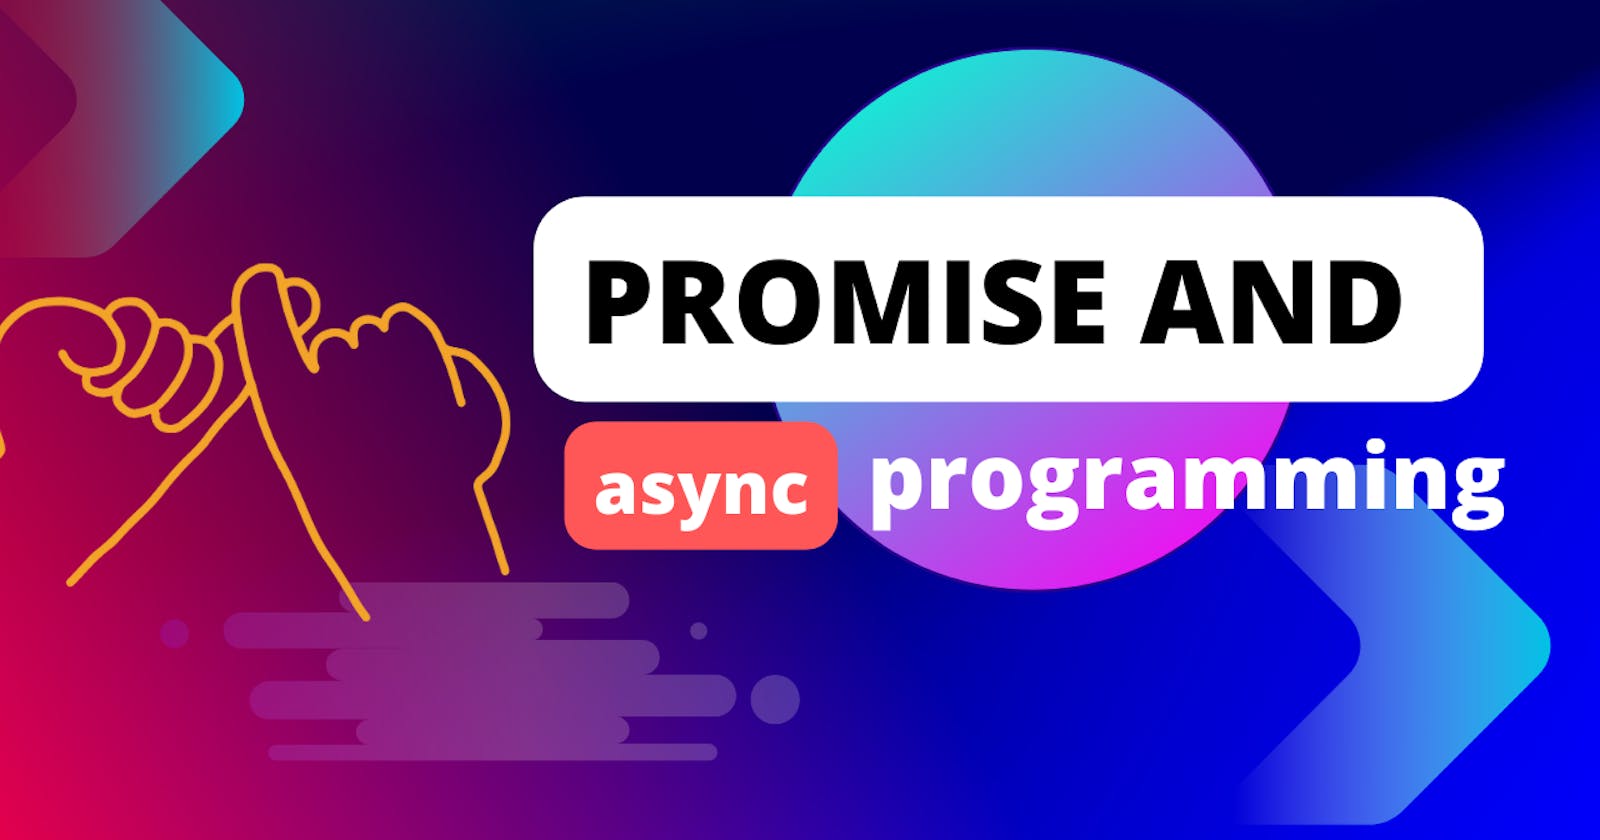 promise and asynchronous programming